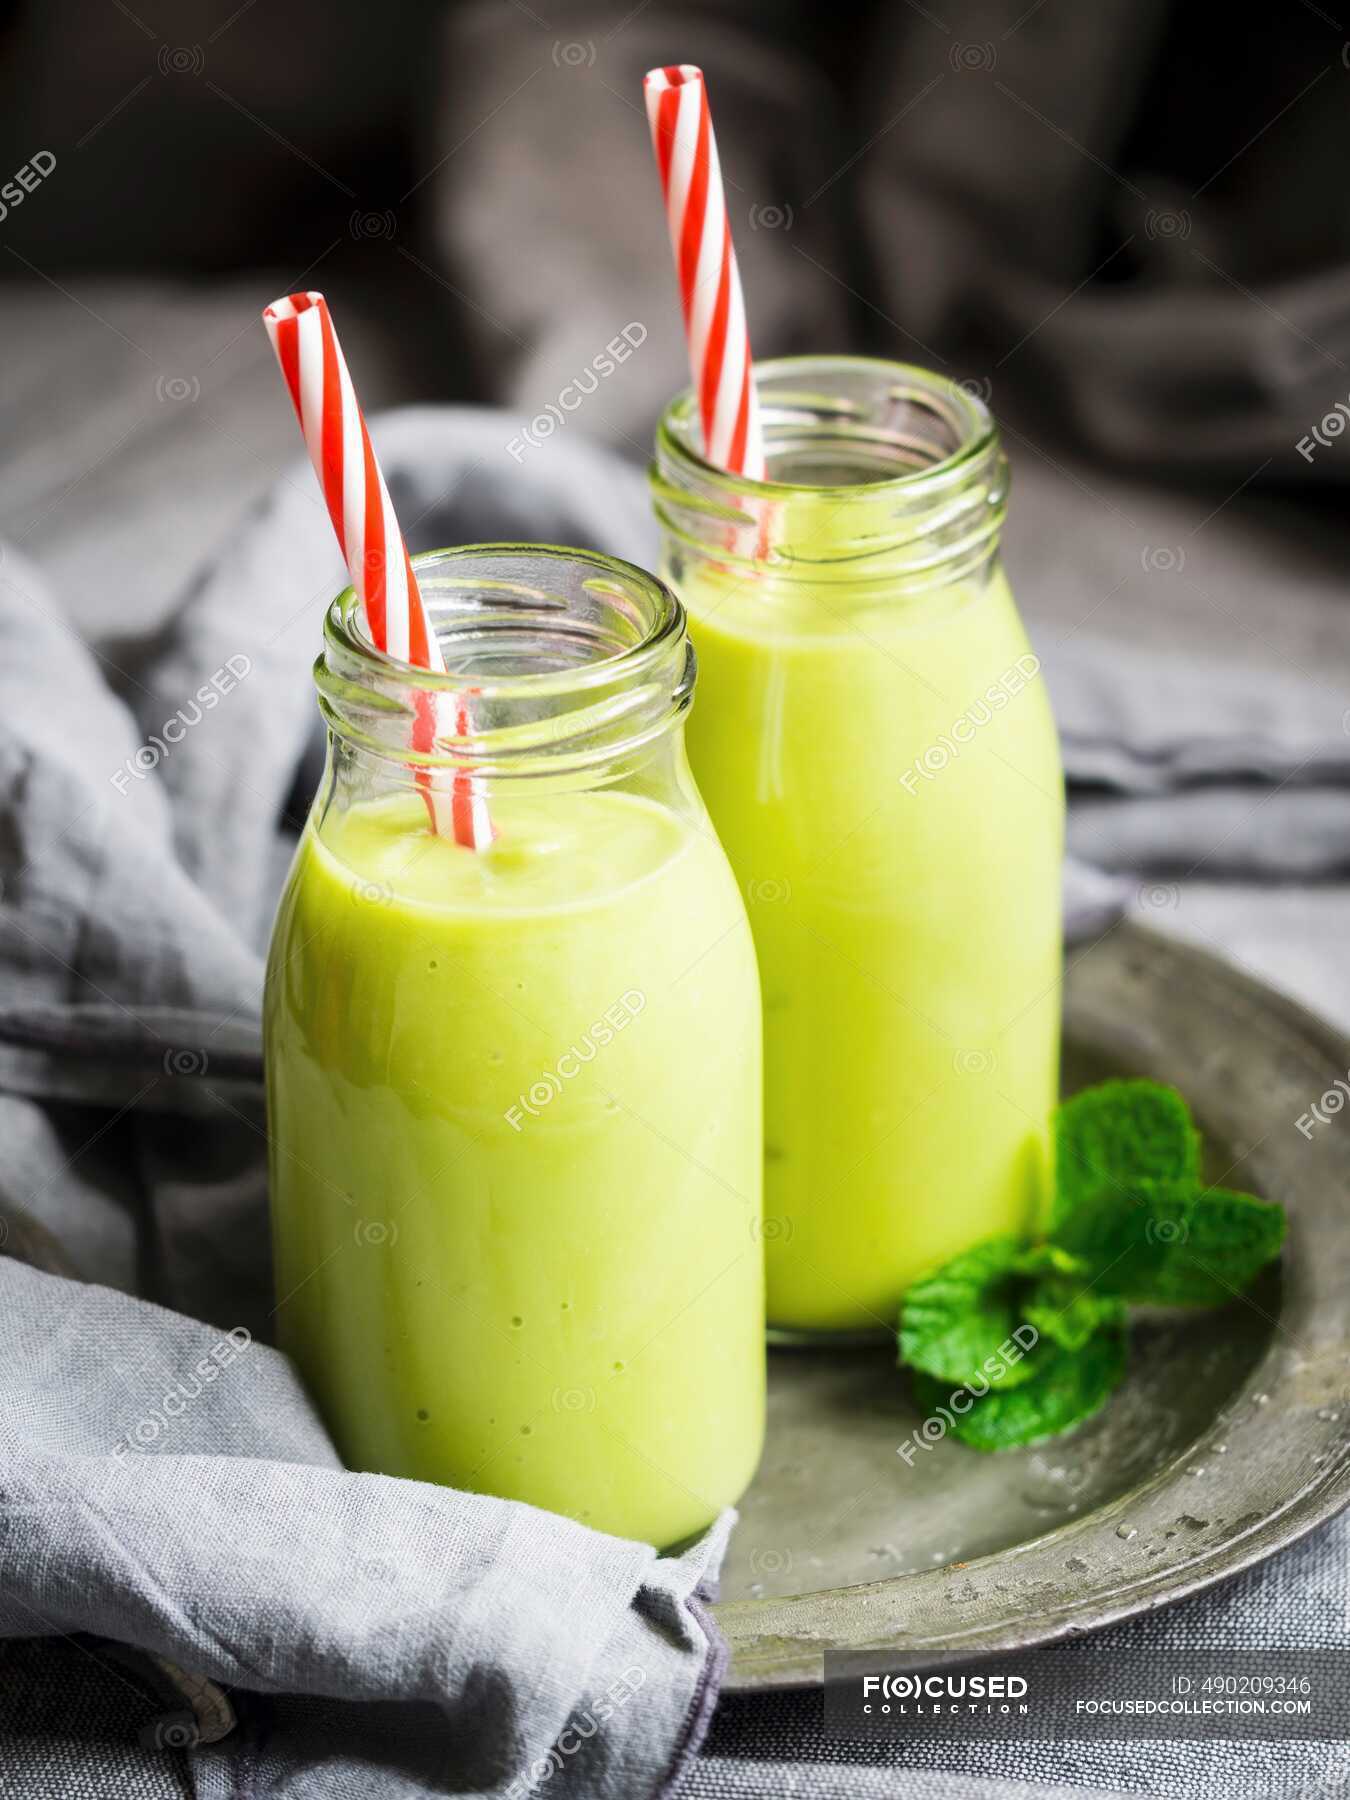 Vegan green smoothies in glass bottles with straws — recipe, fruits - Stock  Photo | #490209346